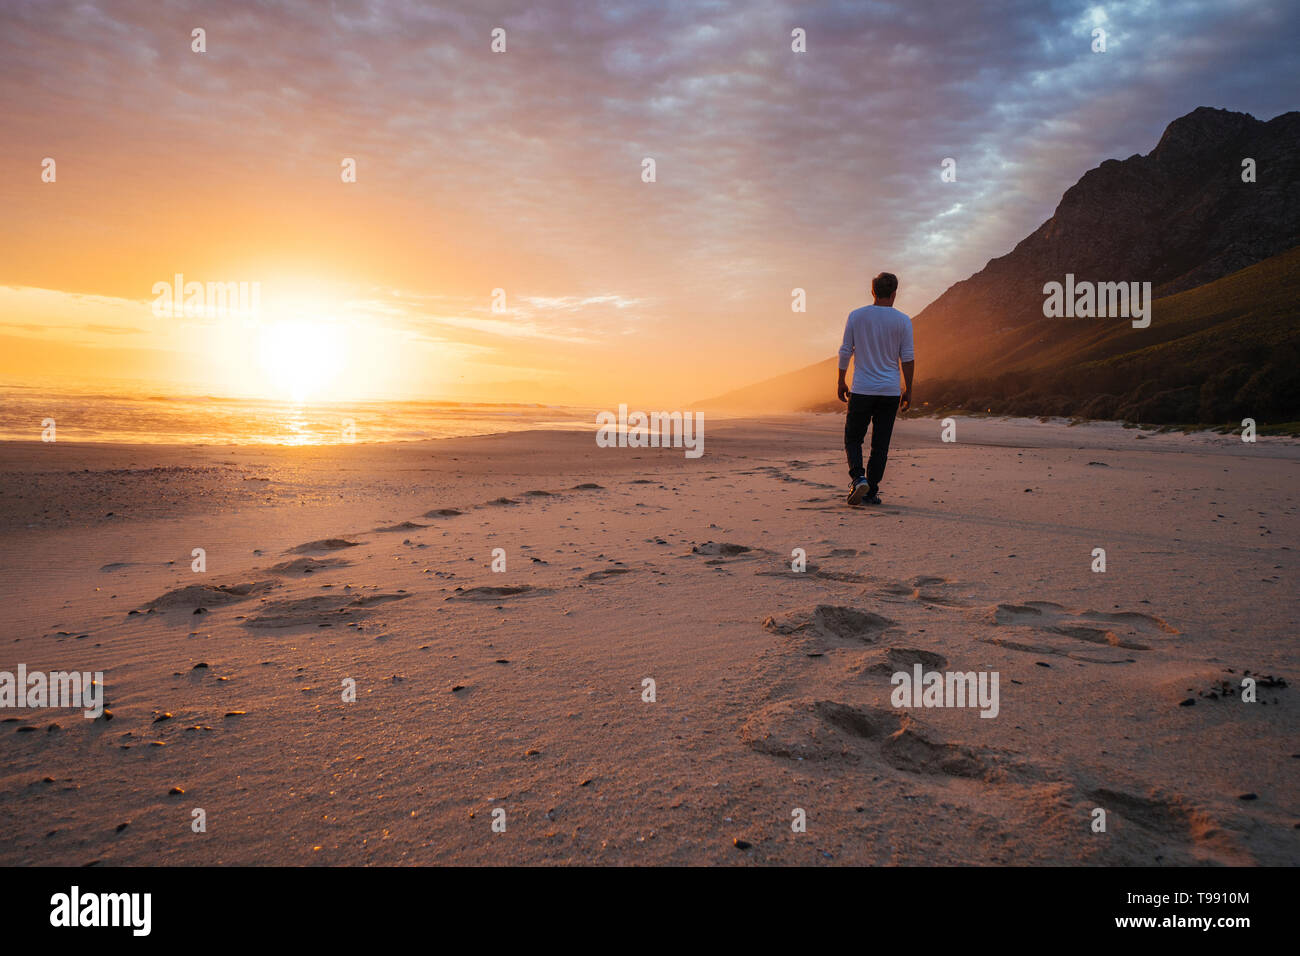 Man on the beach at sunset, Western Cape, South Africa Stock Photo